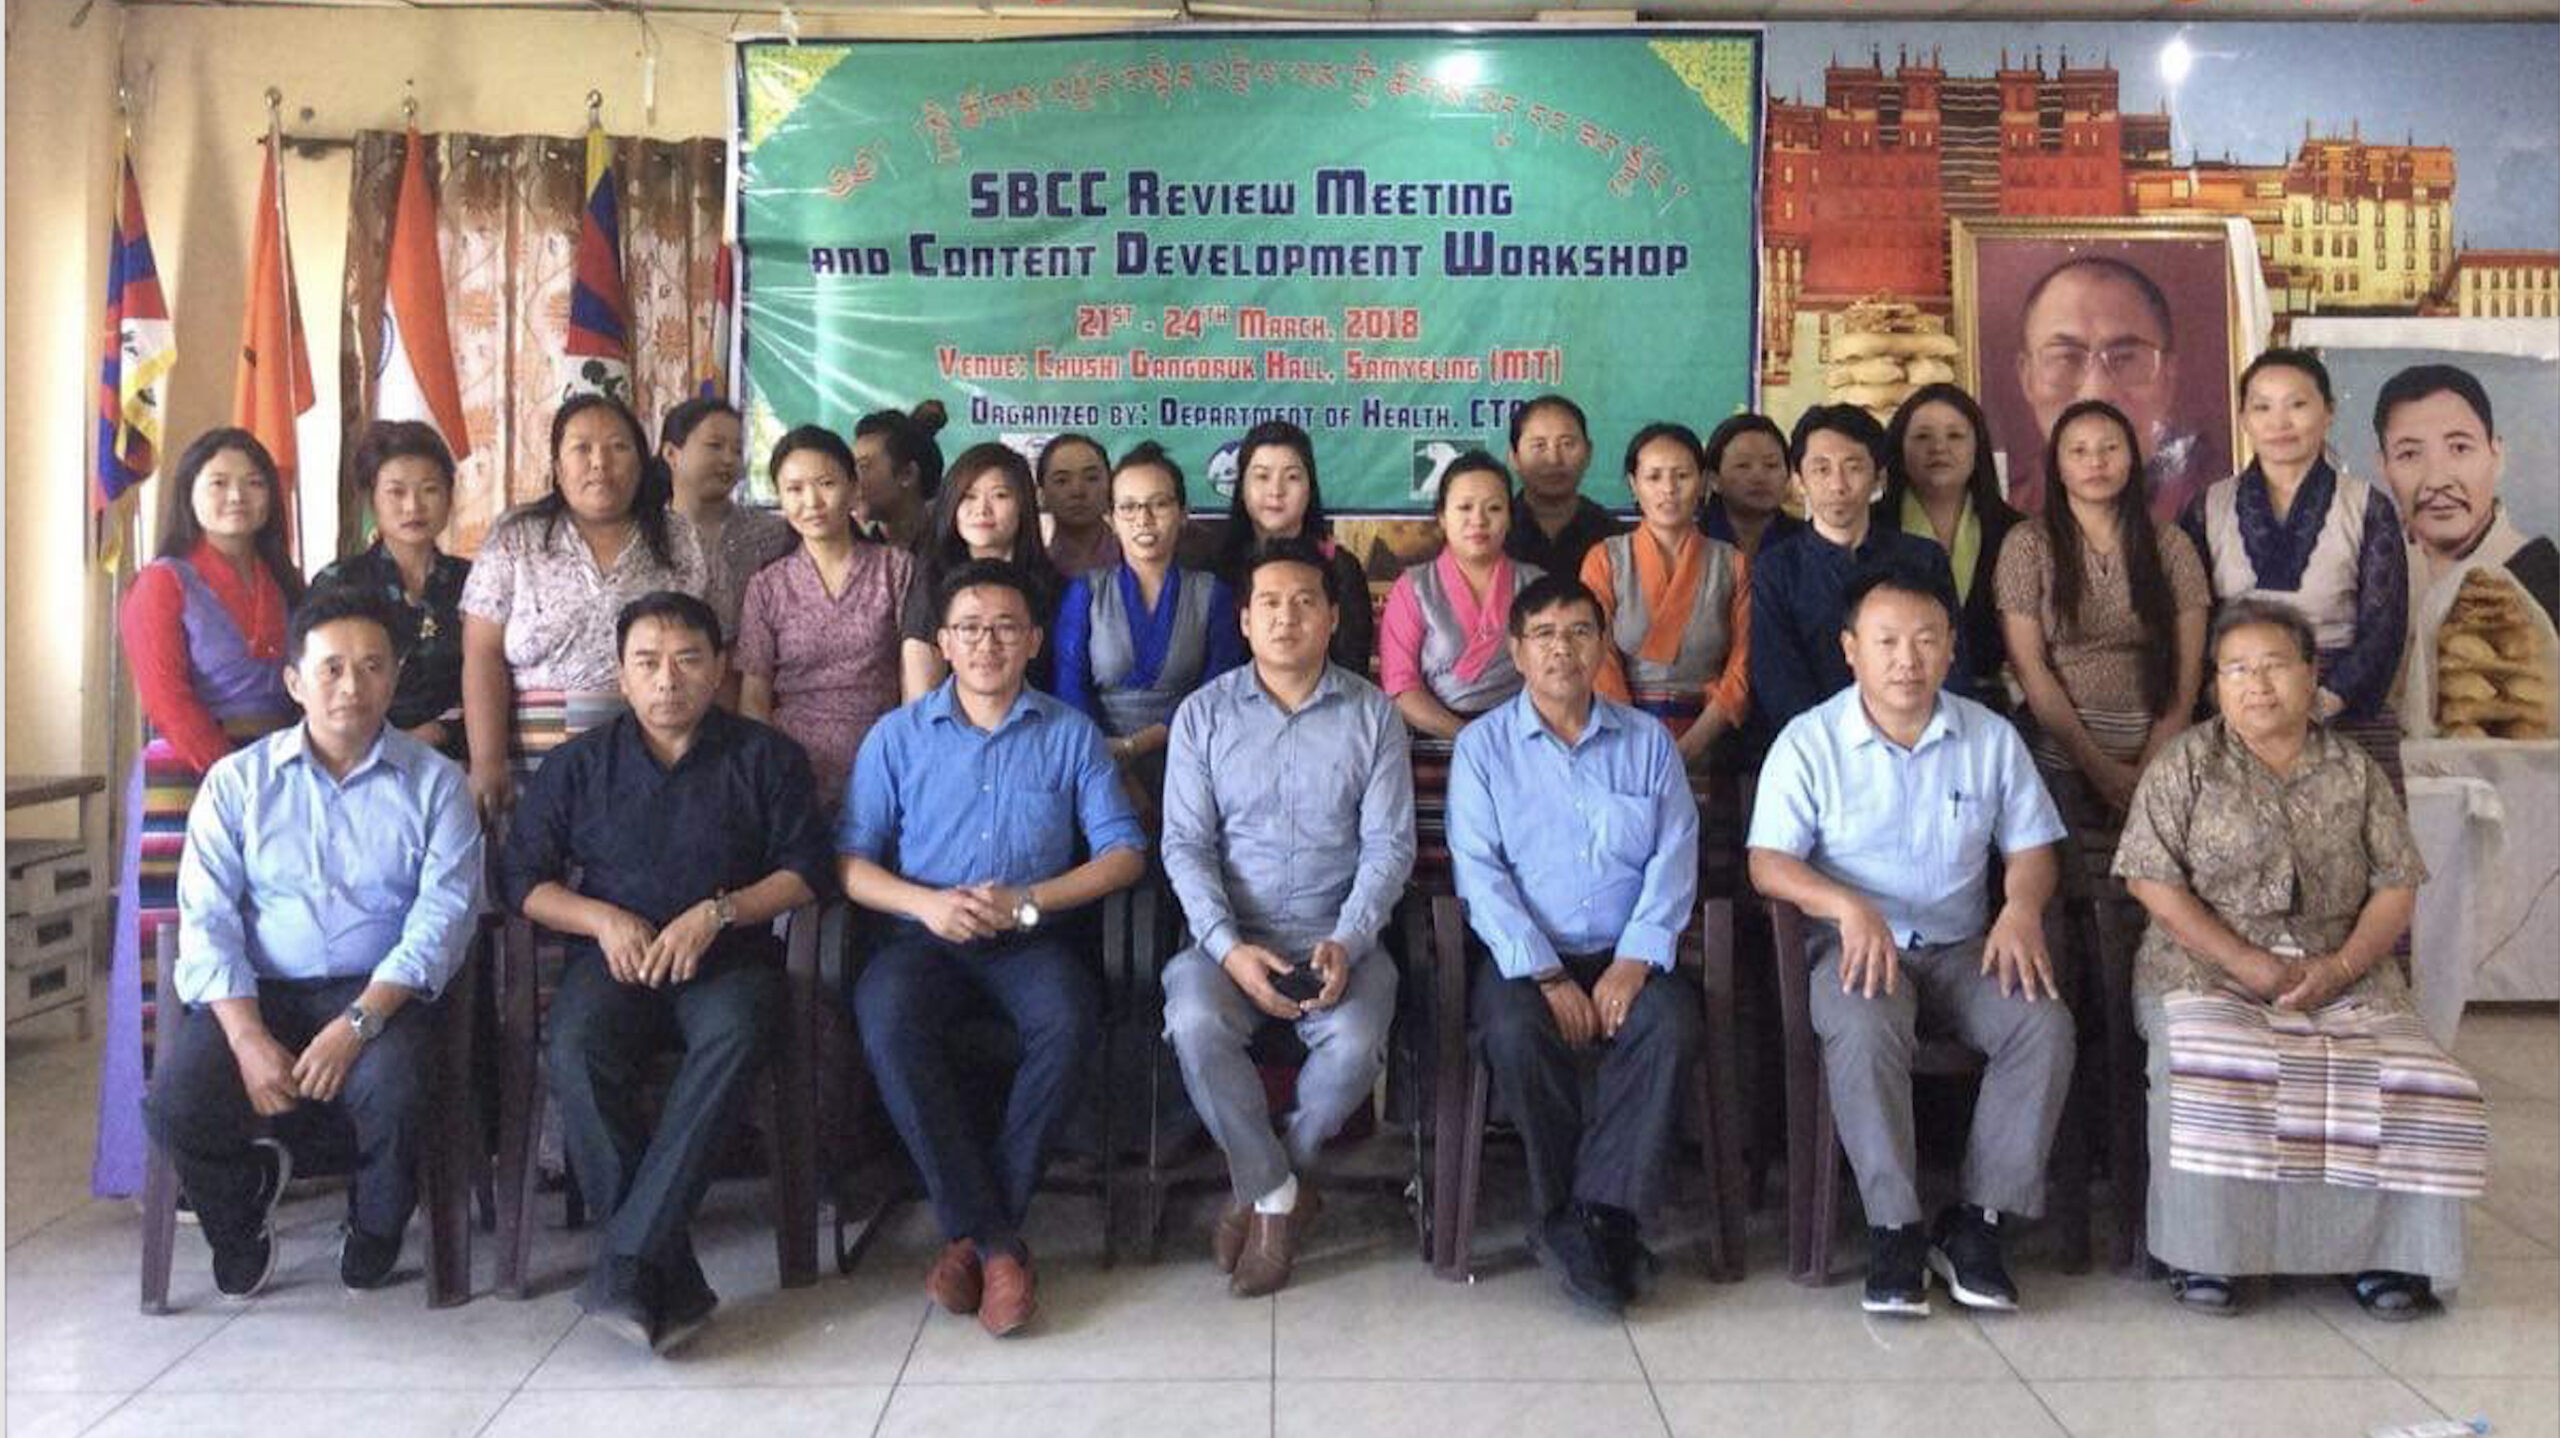 Mr. Pemba Labrang attends SBCC Review Meeting and Content Development Workshop, organised by Department of Health, CTA. 